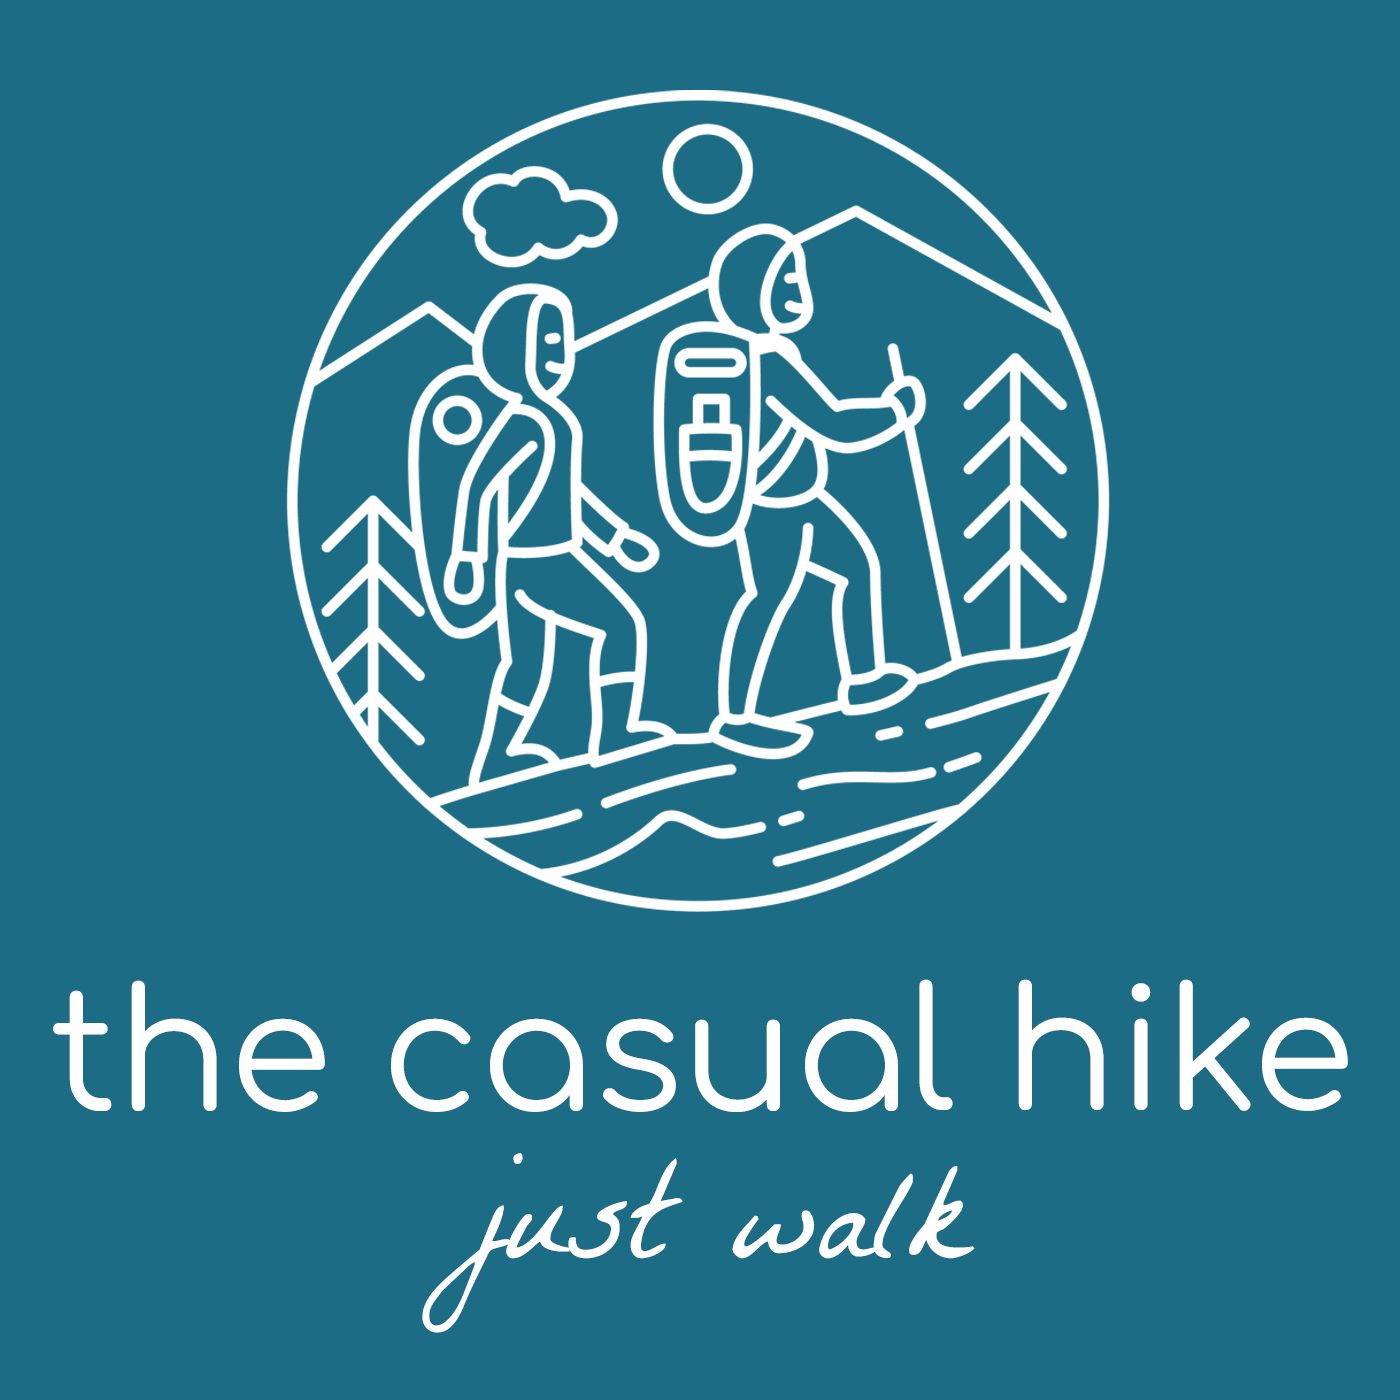 Submitted The Casual Hike to podcastindex.org